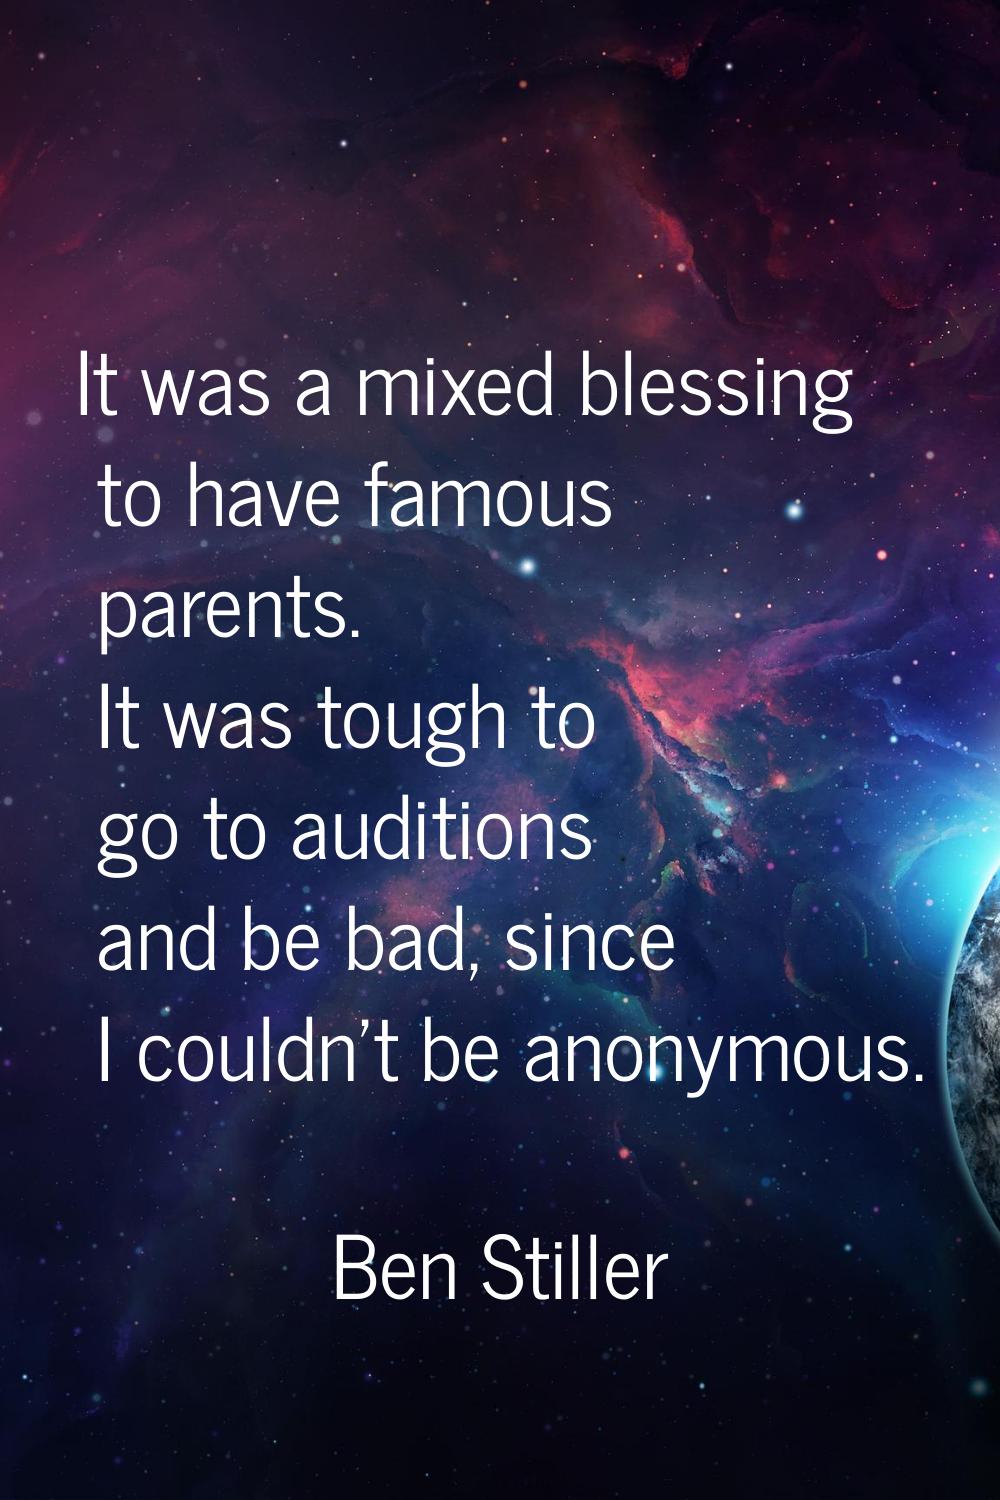 It was a mixed blessing to have famous parents. It was tough to go to auditions and be bad, since I